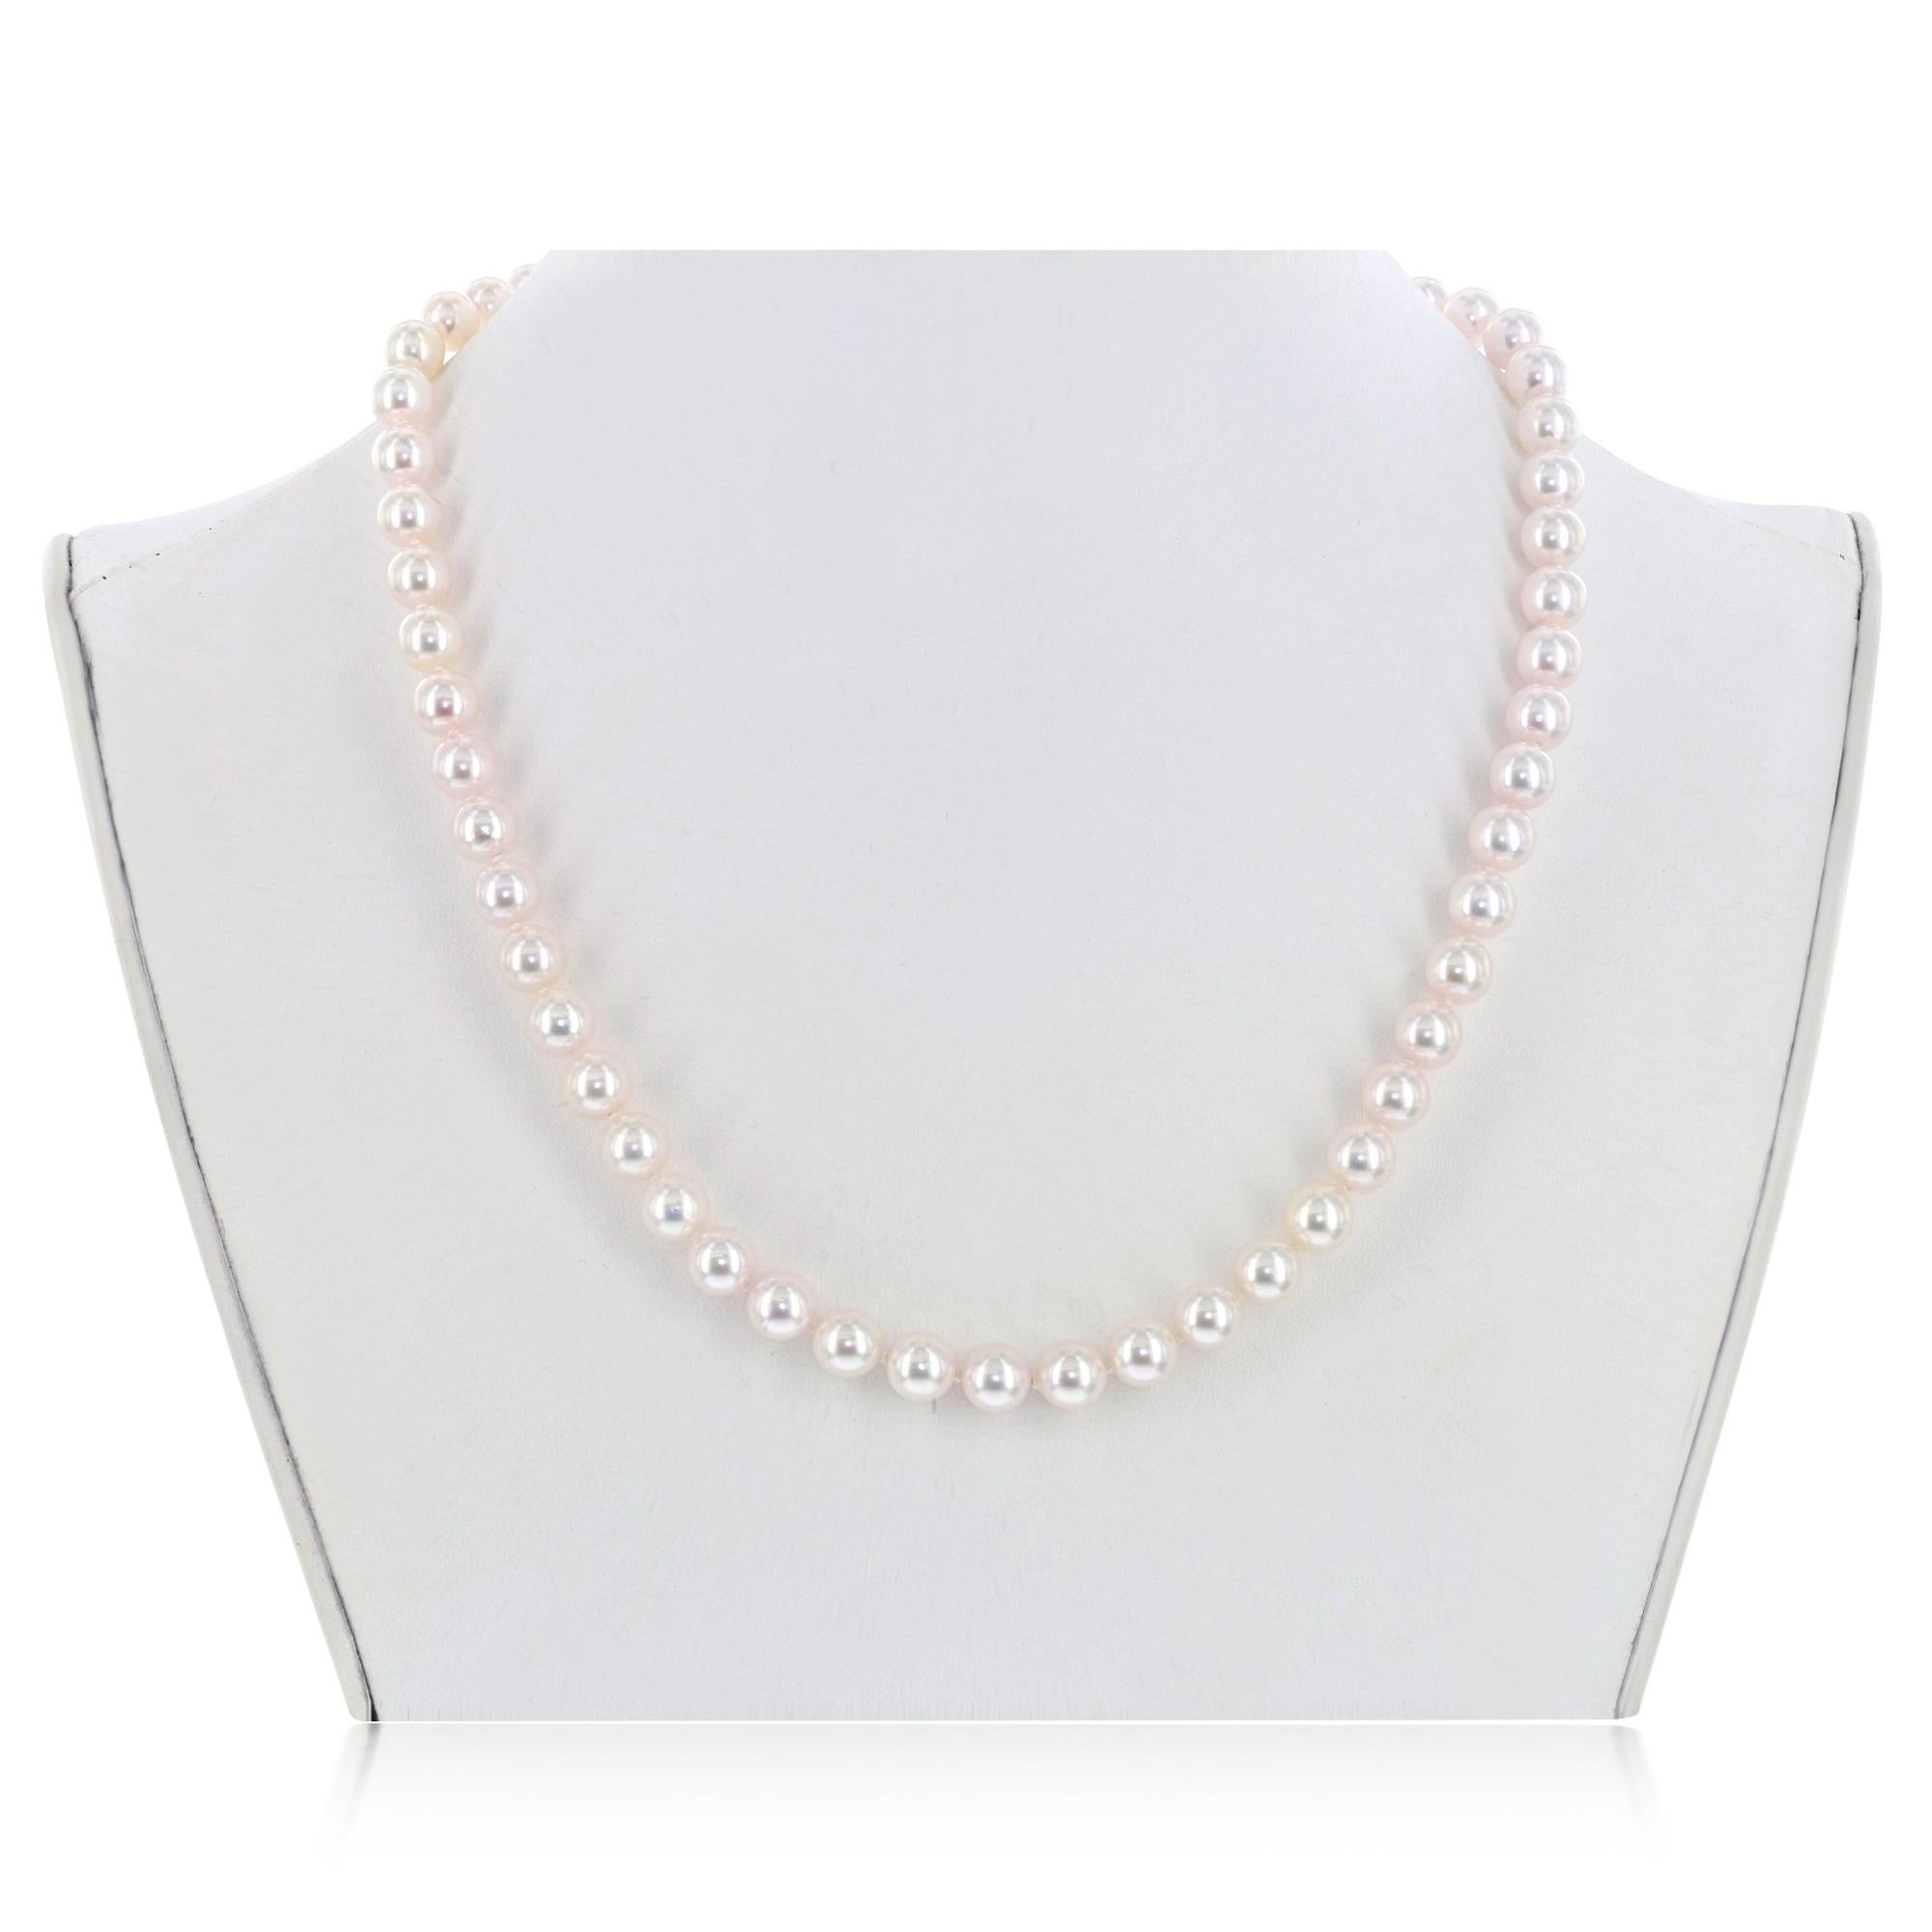 This Japanese Akoya cultured pearl necklace measures 5.5-6mm. This classic pearl necklace is strung to 18 inches with a 14K gold filigree clasp.